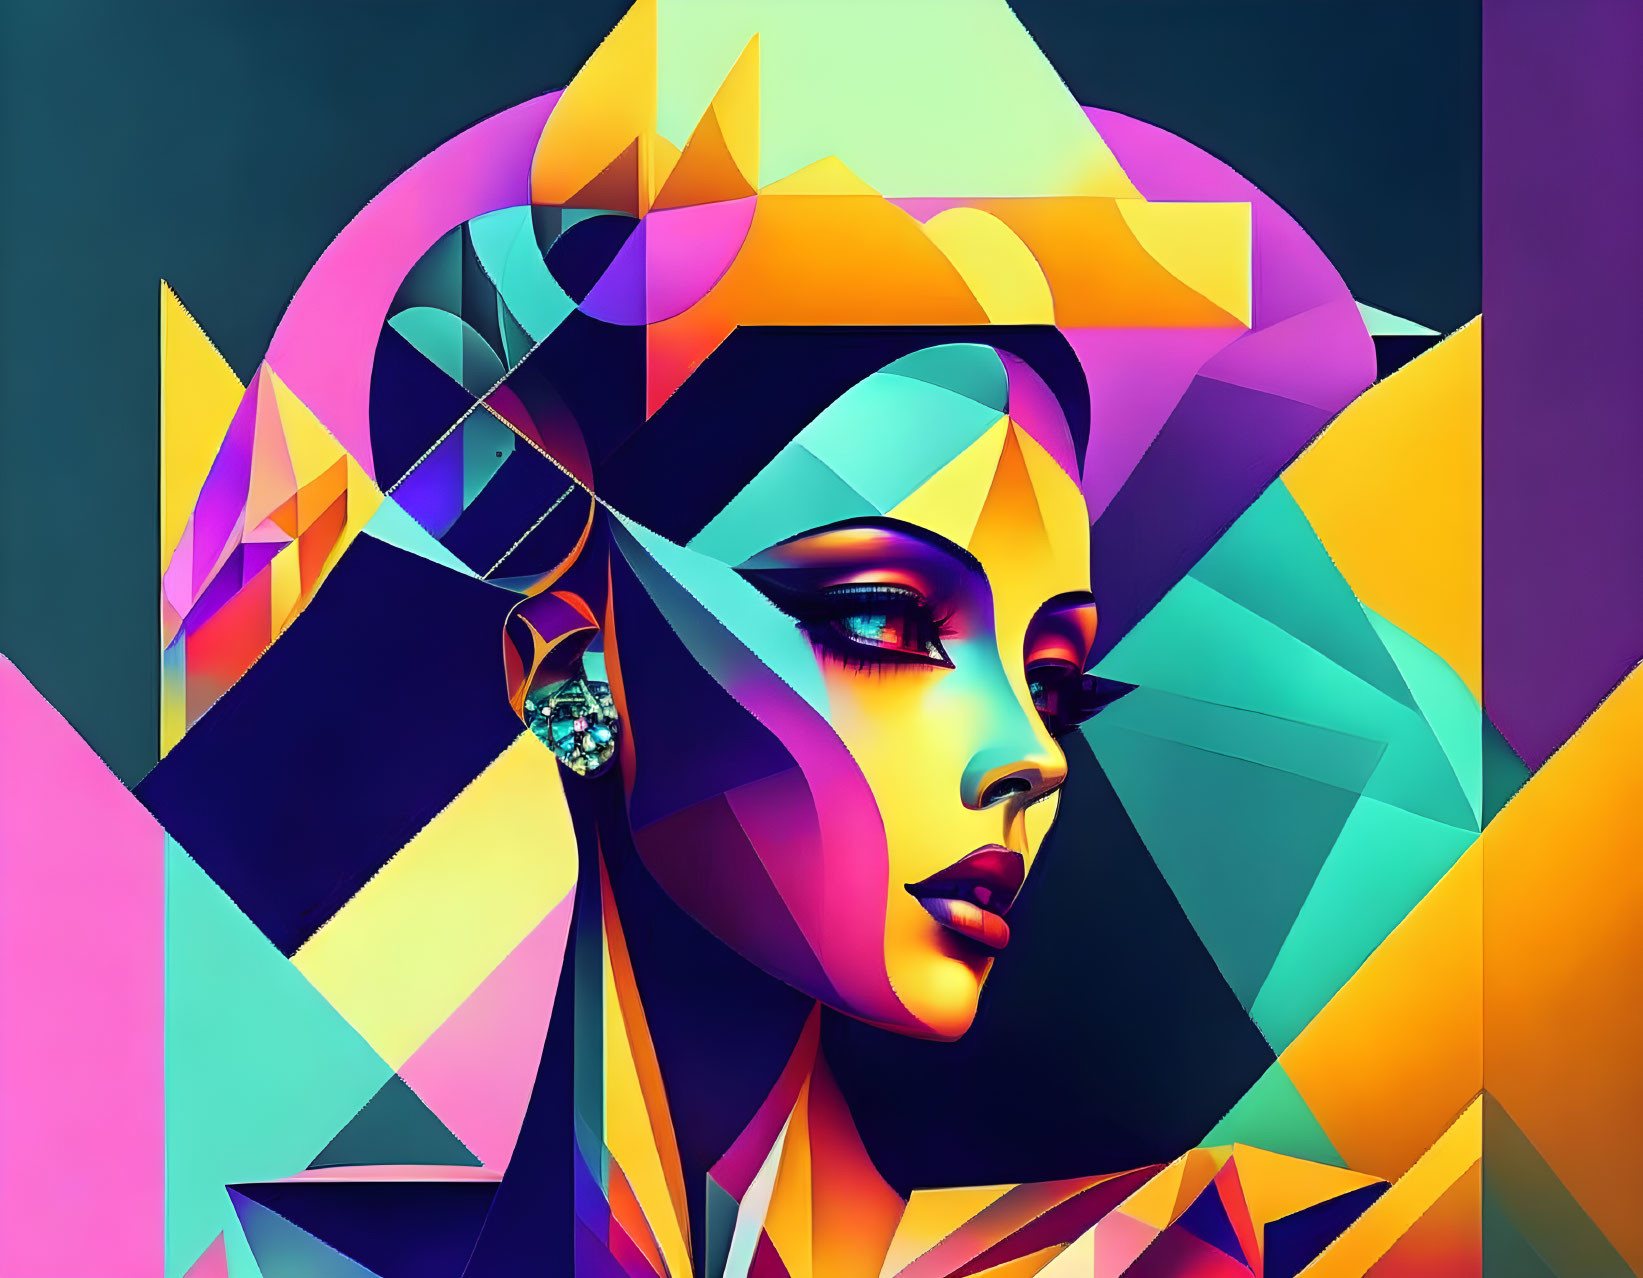 Colorful Abstract Digital Artwork of Woman's Profile with Geometric Shapes